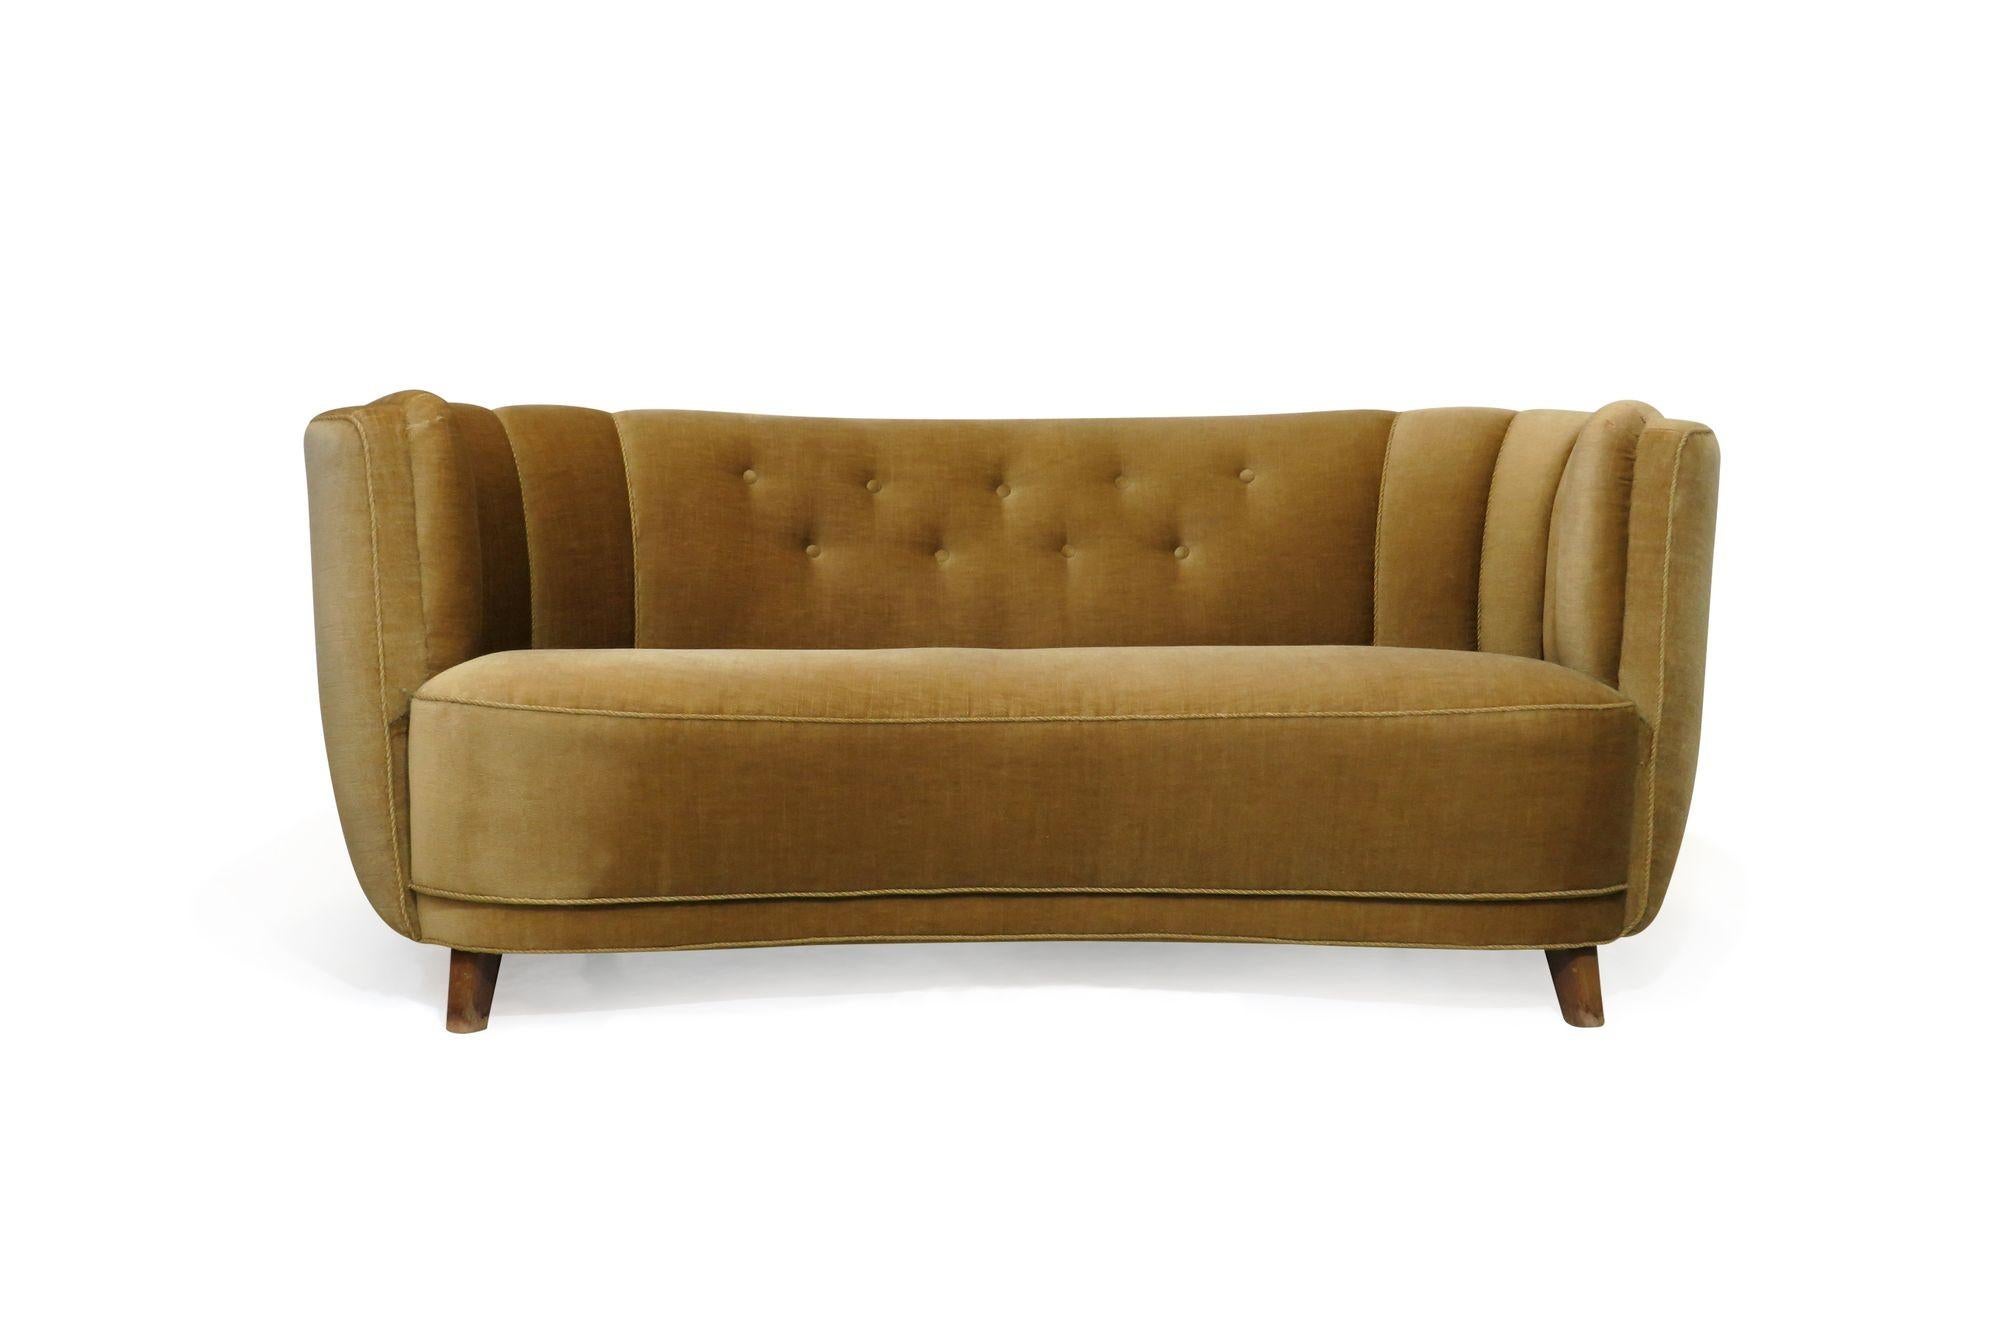 Danish channel back curved sofa circa 1930, Denmark. Sofa crafted of a solid wood frame with eight-way hand-tied springs, horsehair and cotton padding, covered in the in original light gold mohair. Good vintage condition can be used original or